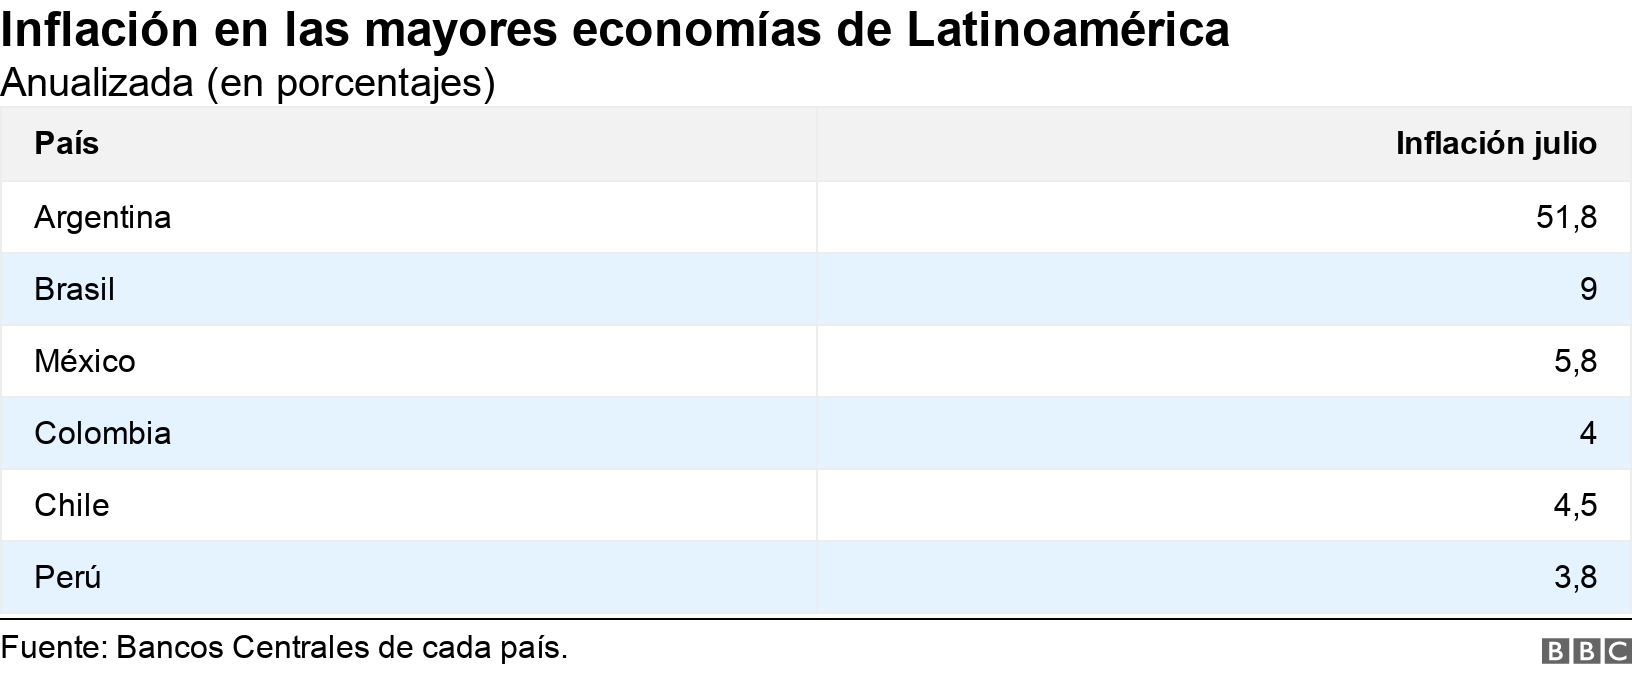 Inflation in the largest economies in Latin America.  Annualized (in percentages).  .